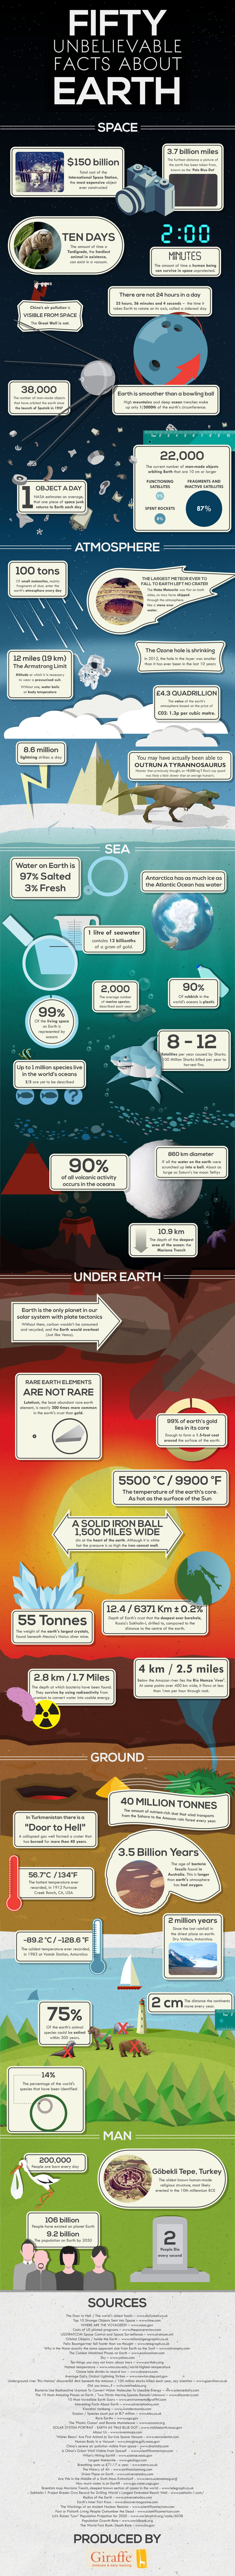 50-facts-about-earth3 (1)